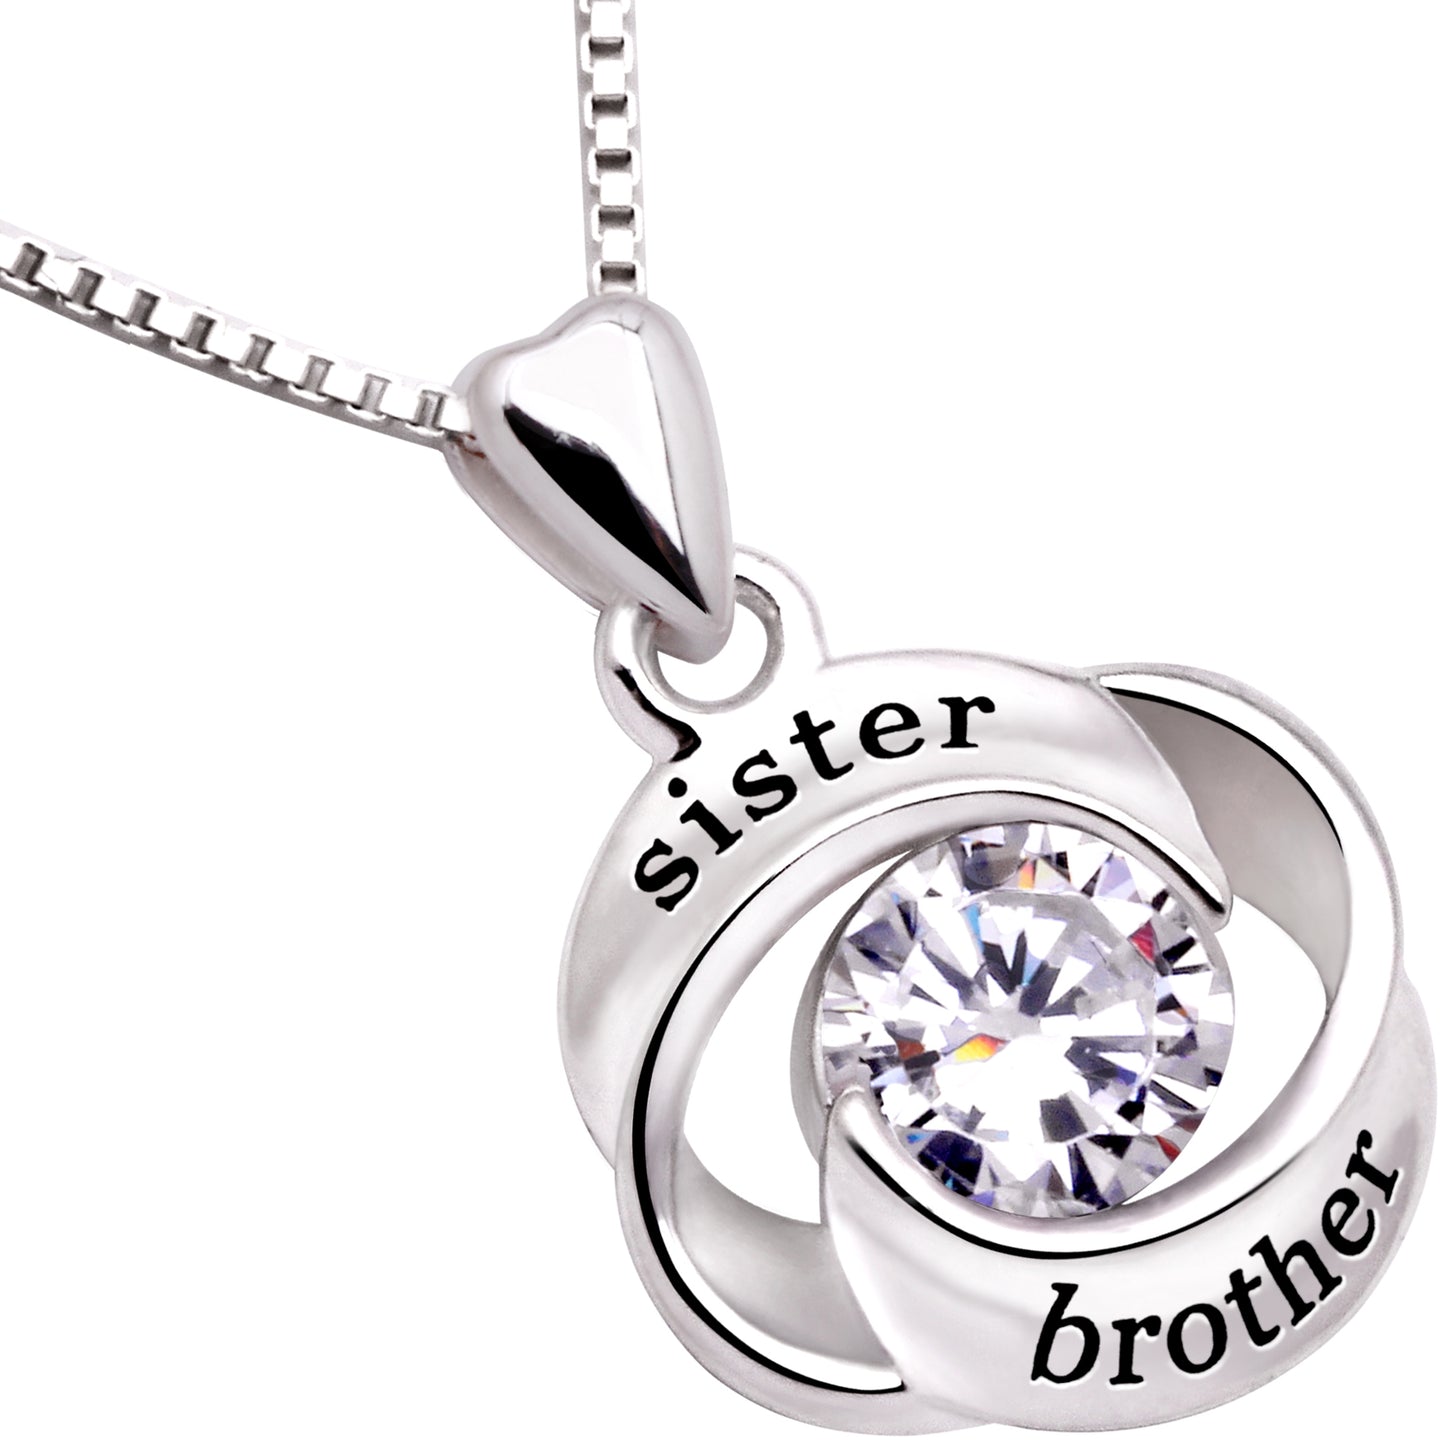 ALOV Jewelry Sterling Silver sister and brother Love Heart Cubic Zirconia Pendant Necklace